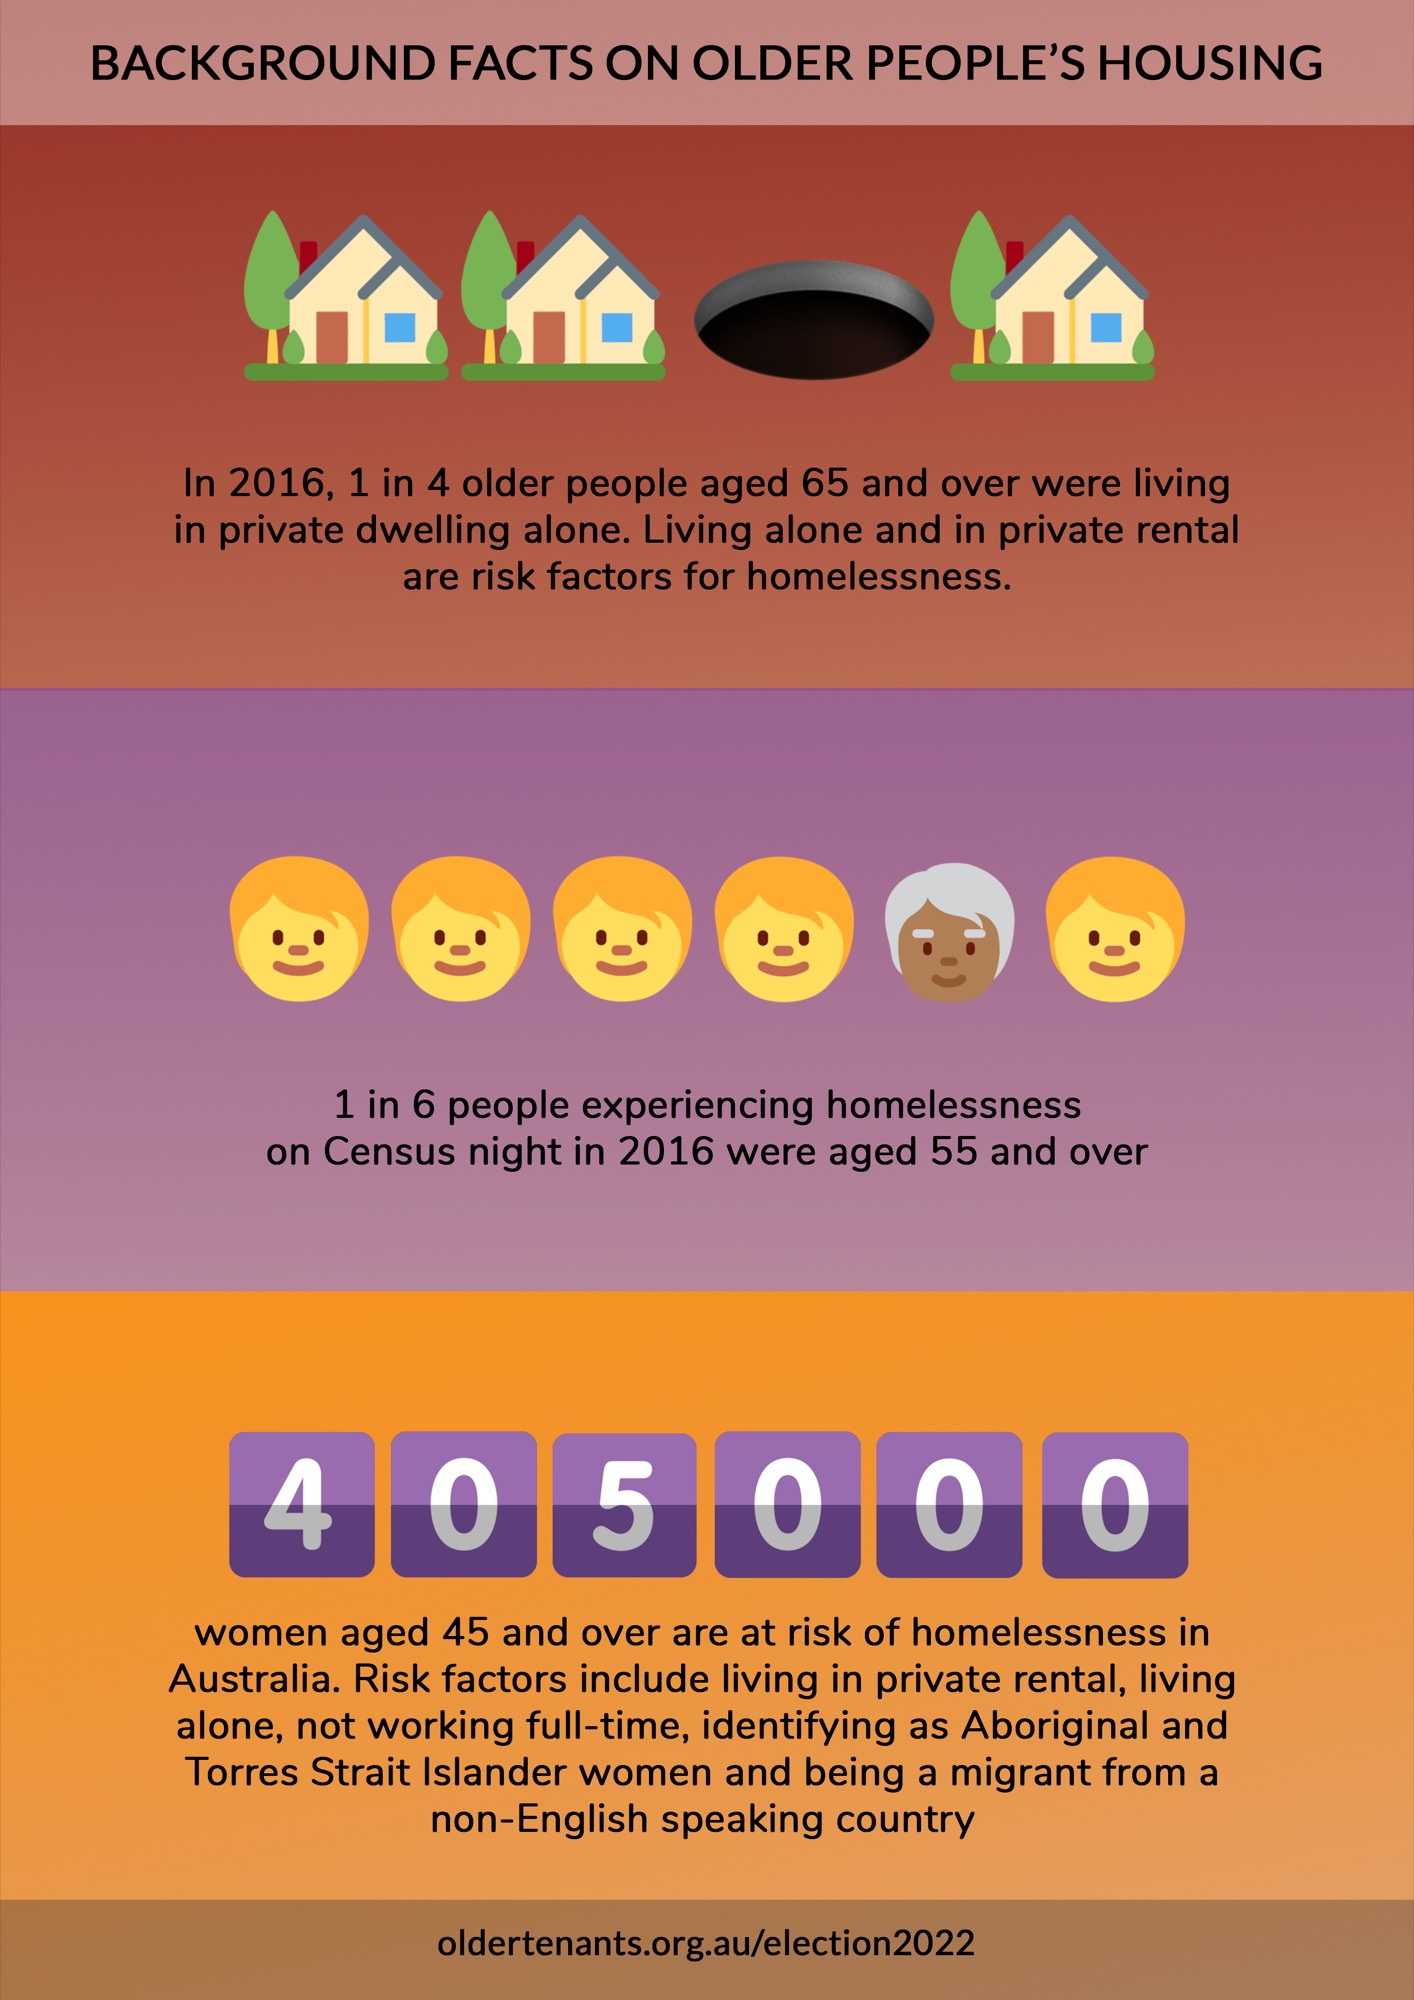 Background facts about older peoples homelessness in Australia